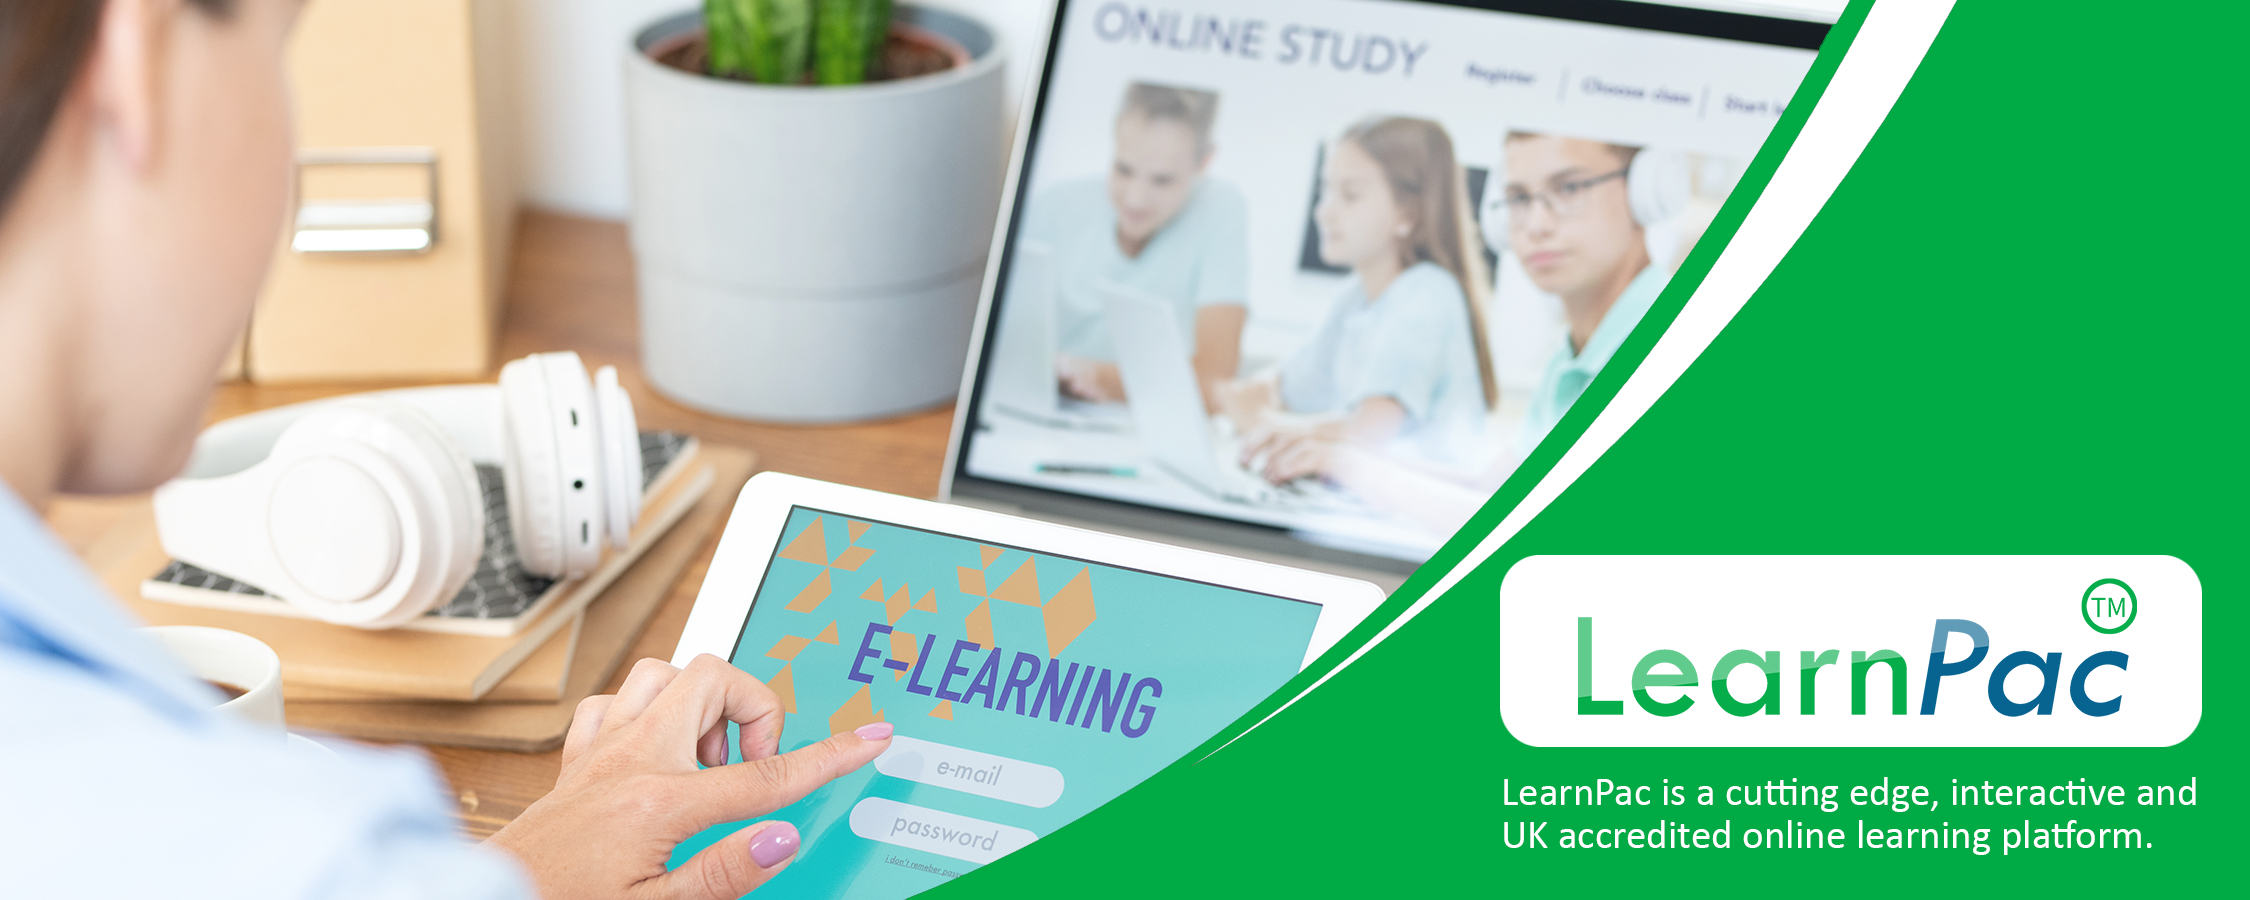 Develop and Maintain Professional Networks - Online Learning Courses - E-Learning Courses - LearnPac Systems UK -